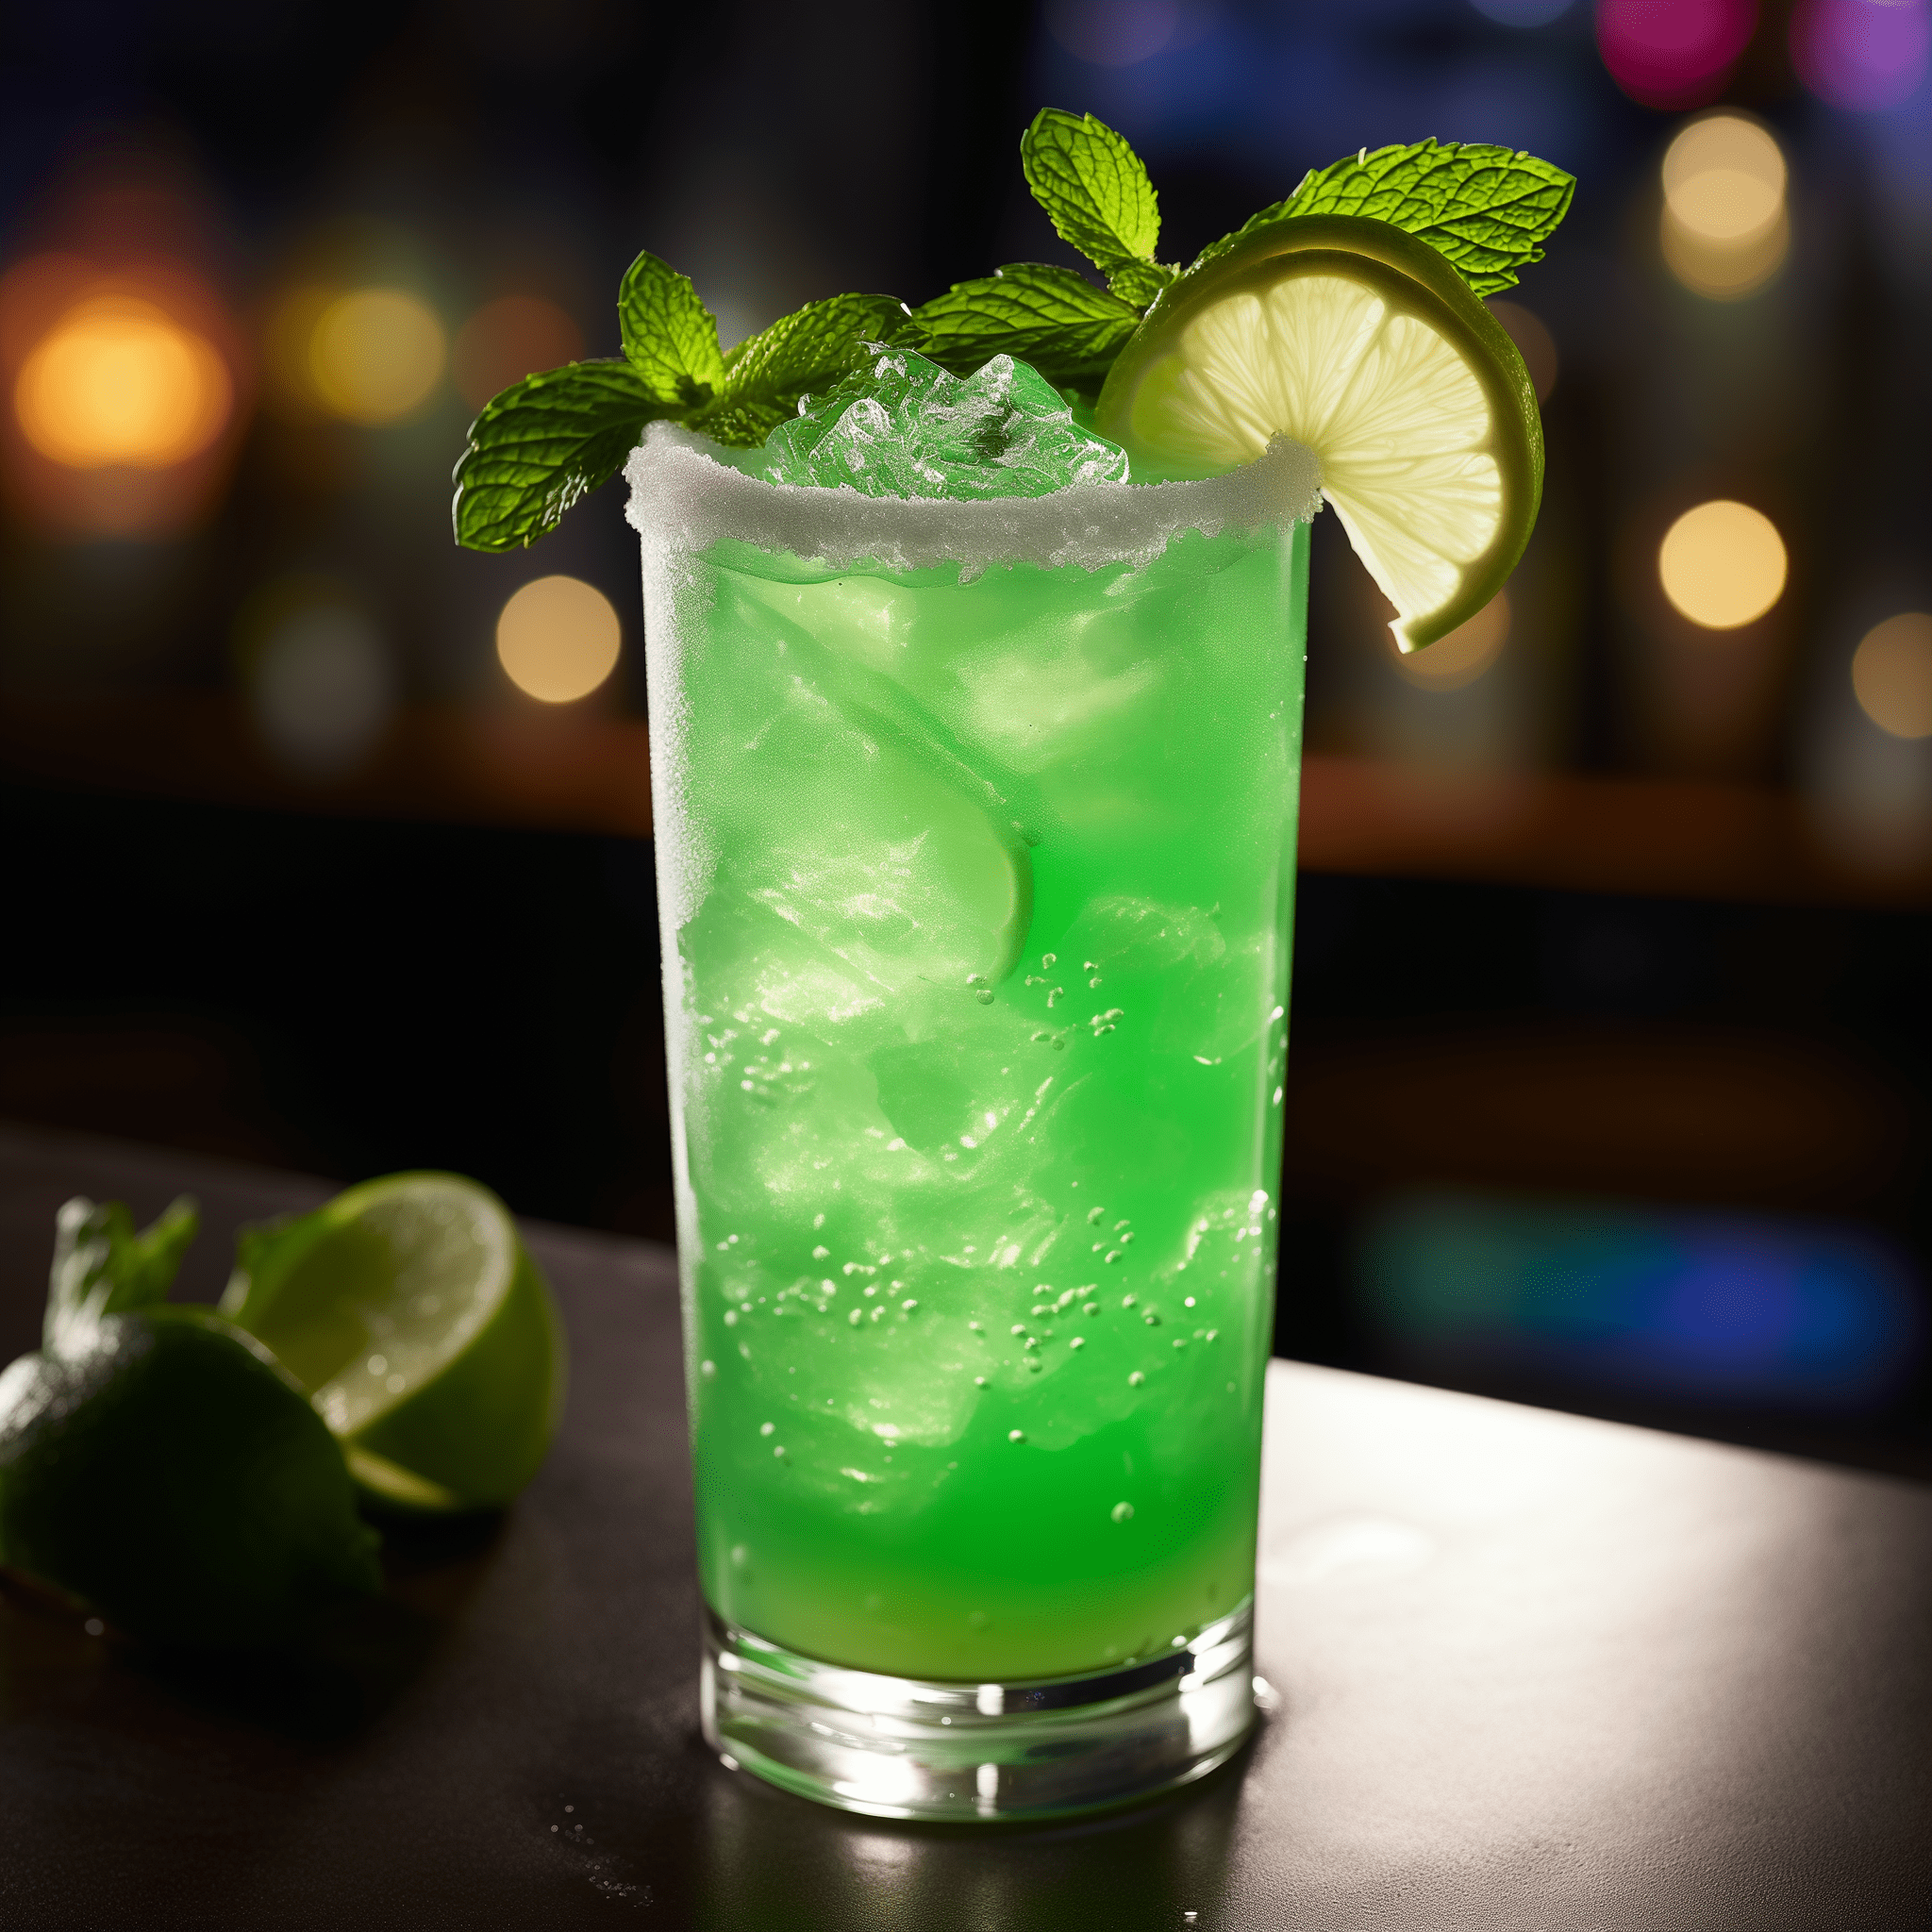 Grinch Punch is a sweet, tangy, and slightly bubbly concoction. The lime sherbet provides a creamy, citrusy base, while the Sprite and fruit punch add a refreshing zing. The vodka and rum give it a boozy kick without overpowering the other flavors.